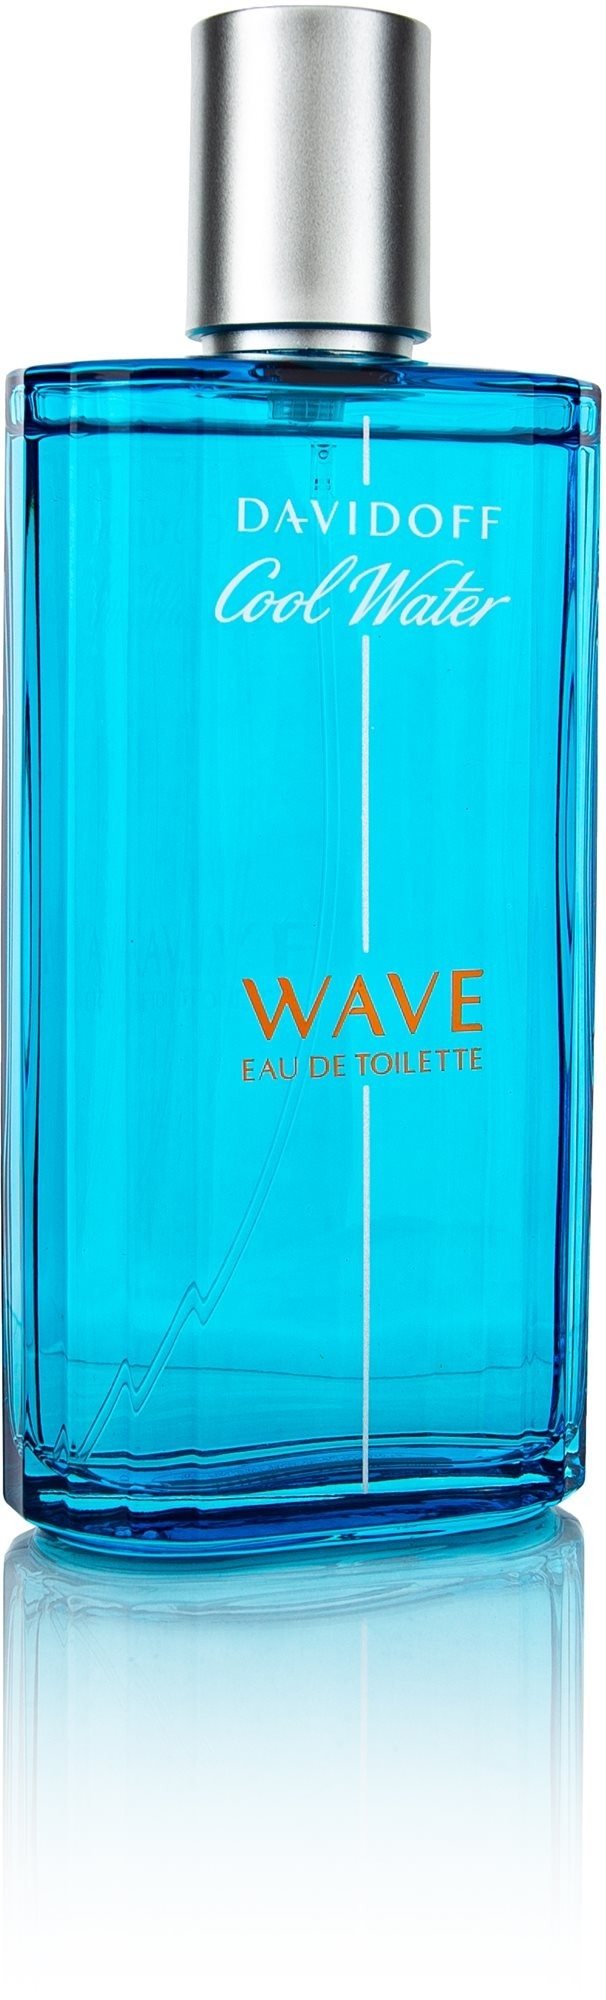 DAVIDOFF Cool Water Wave For Men EdT